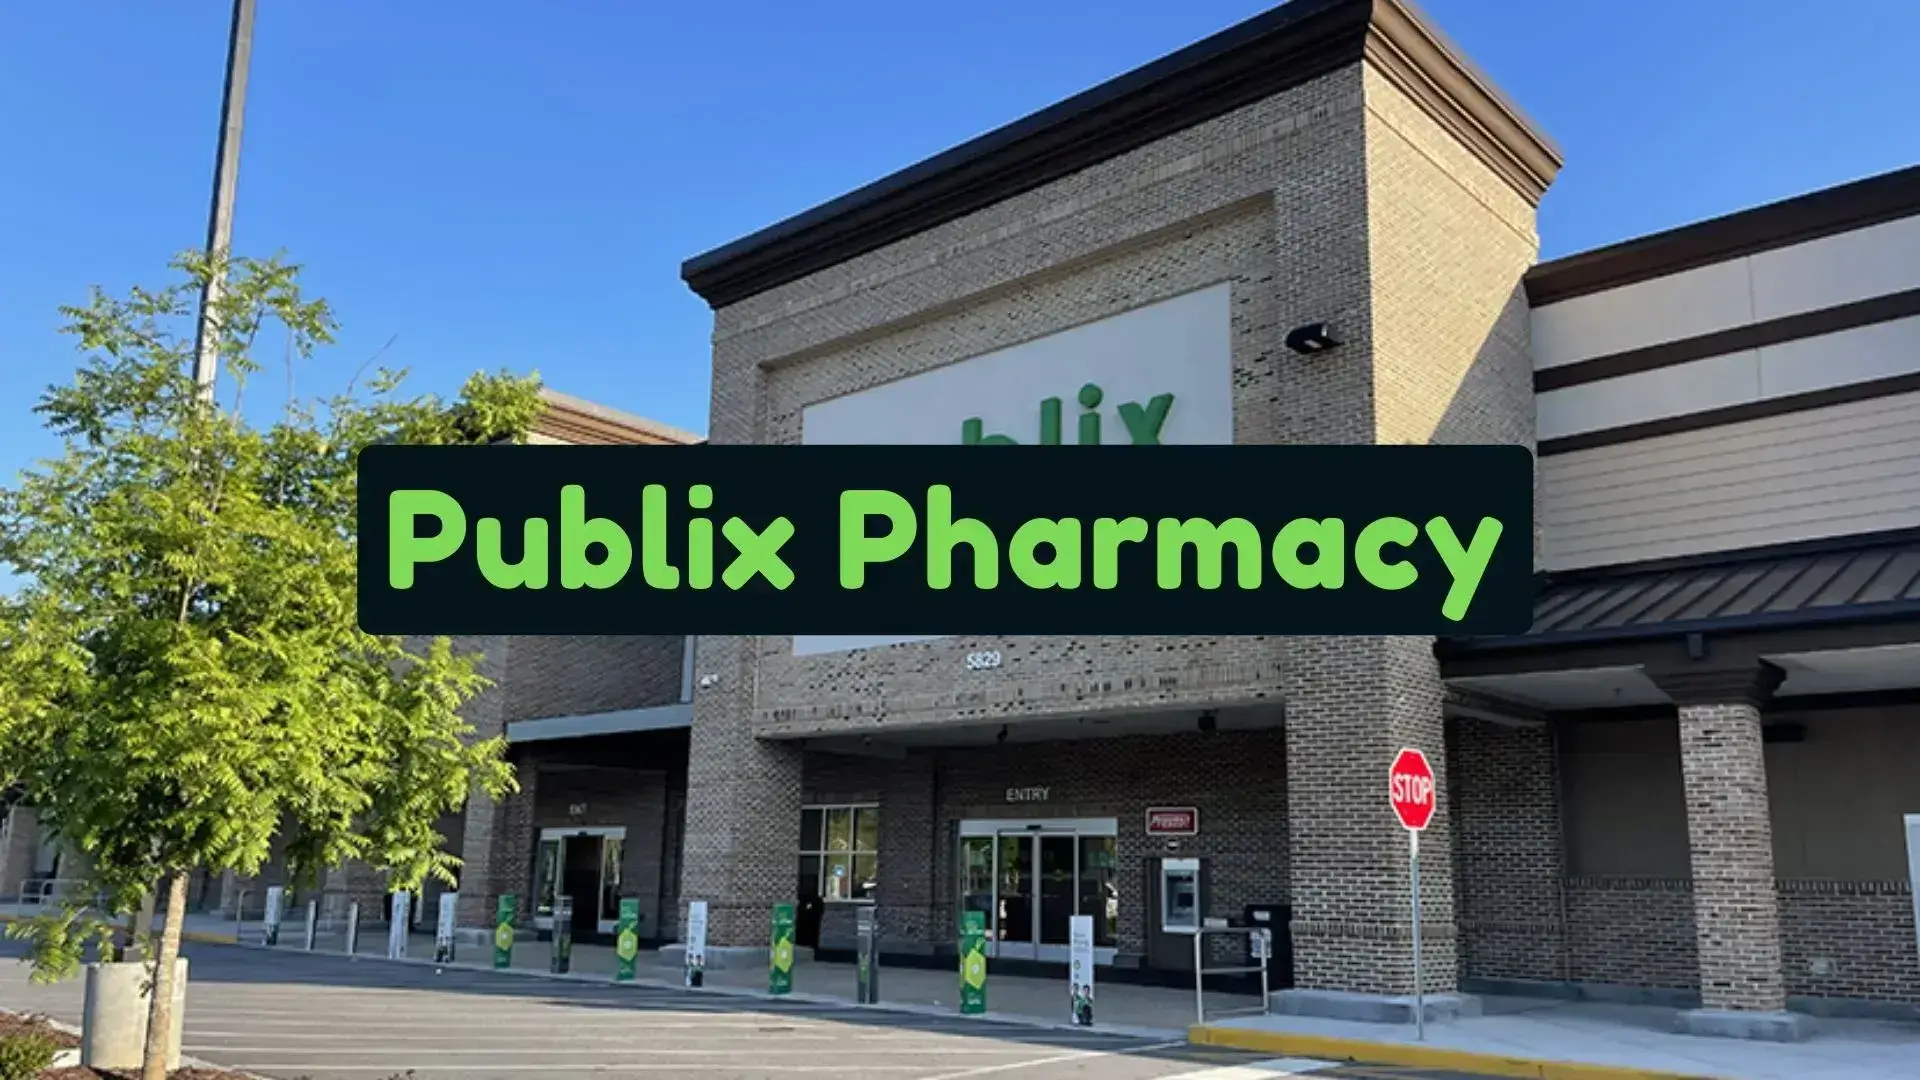 What Time Does Publix Pharmacy Open And Close ?